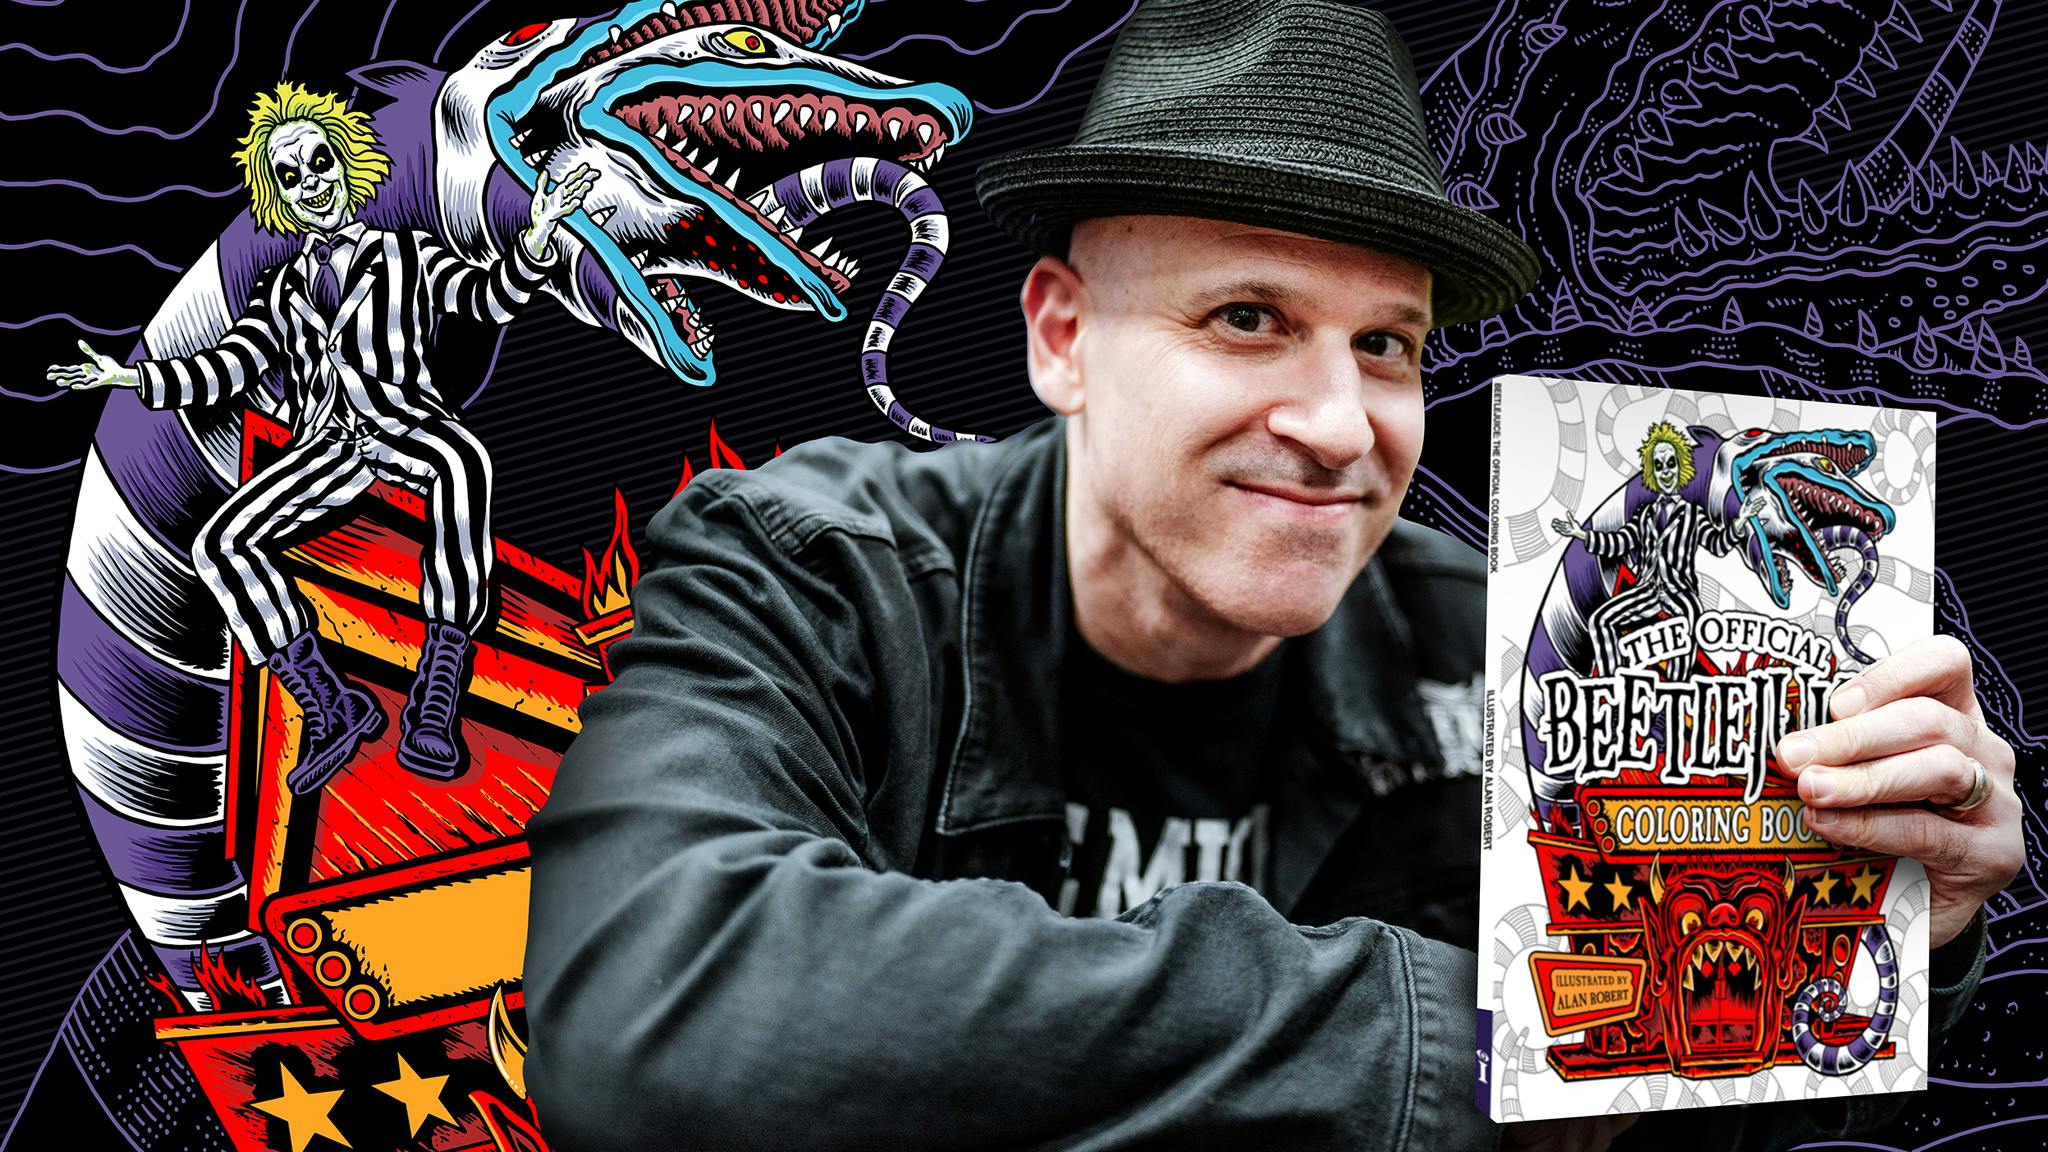 Life Of Agony’s Alan Robert has illustrated an official Beetlejuice colouring book